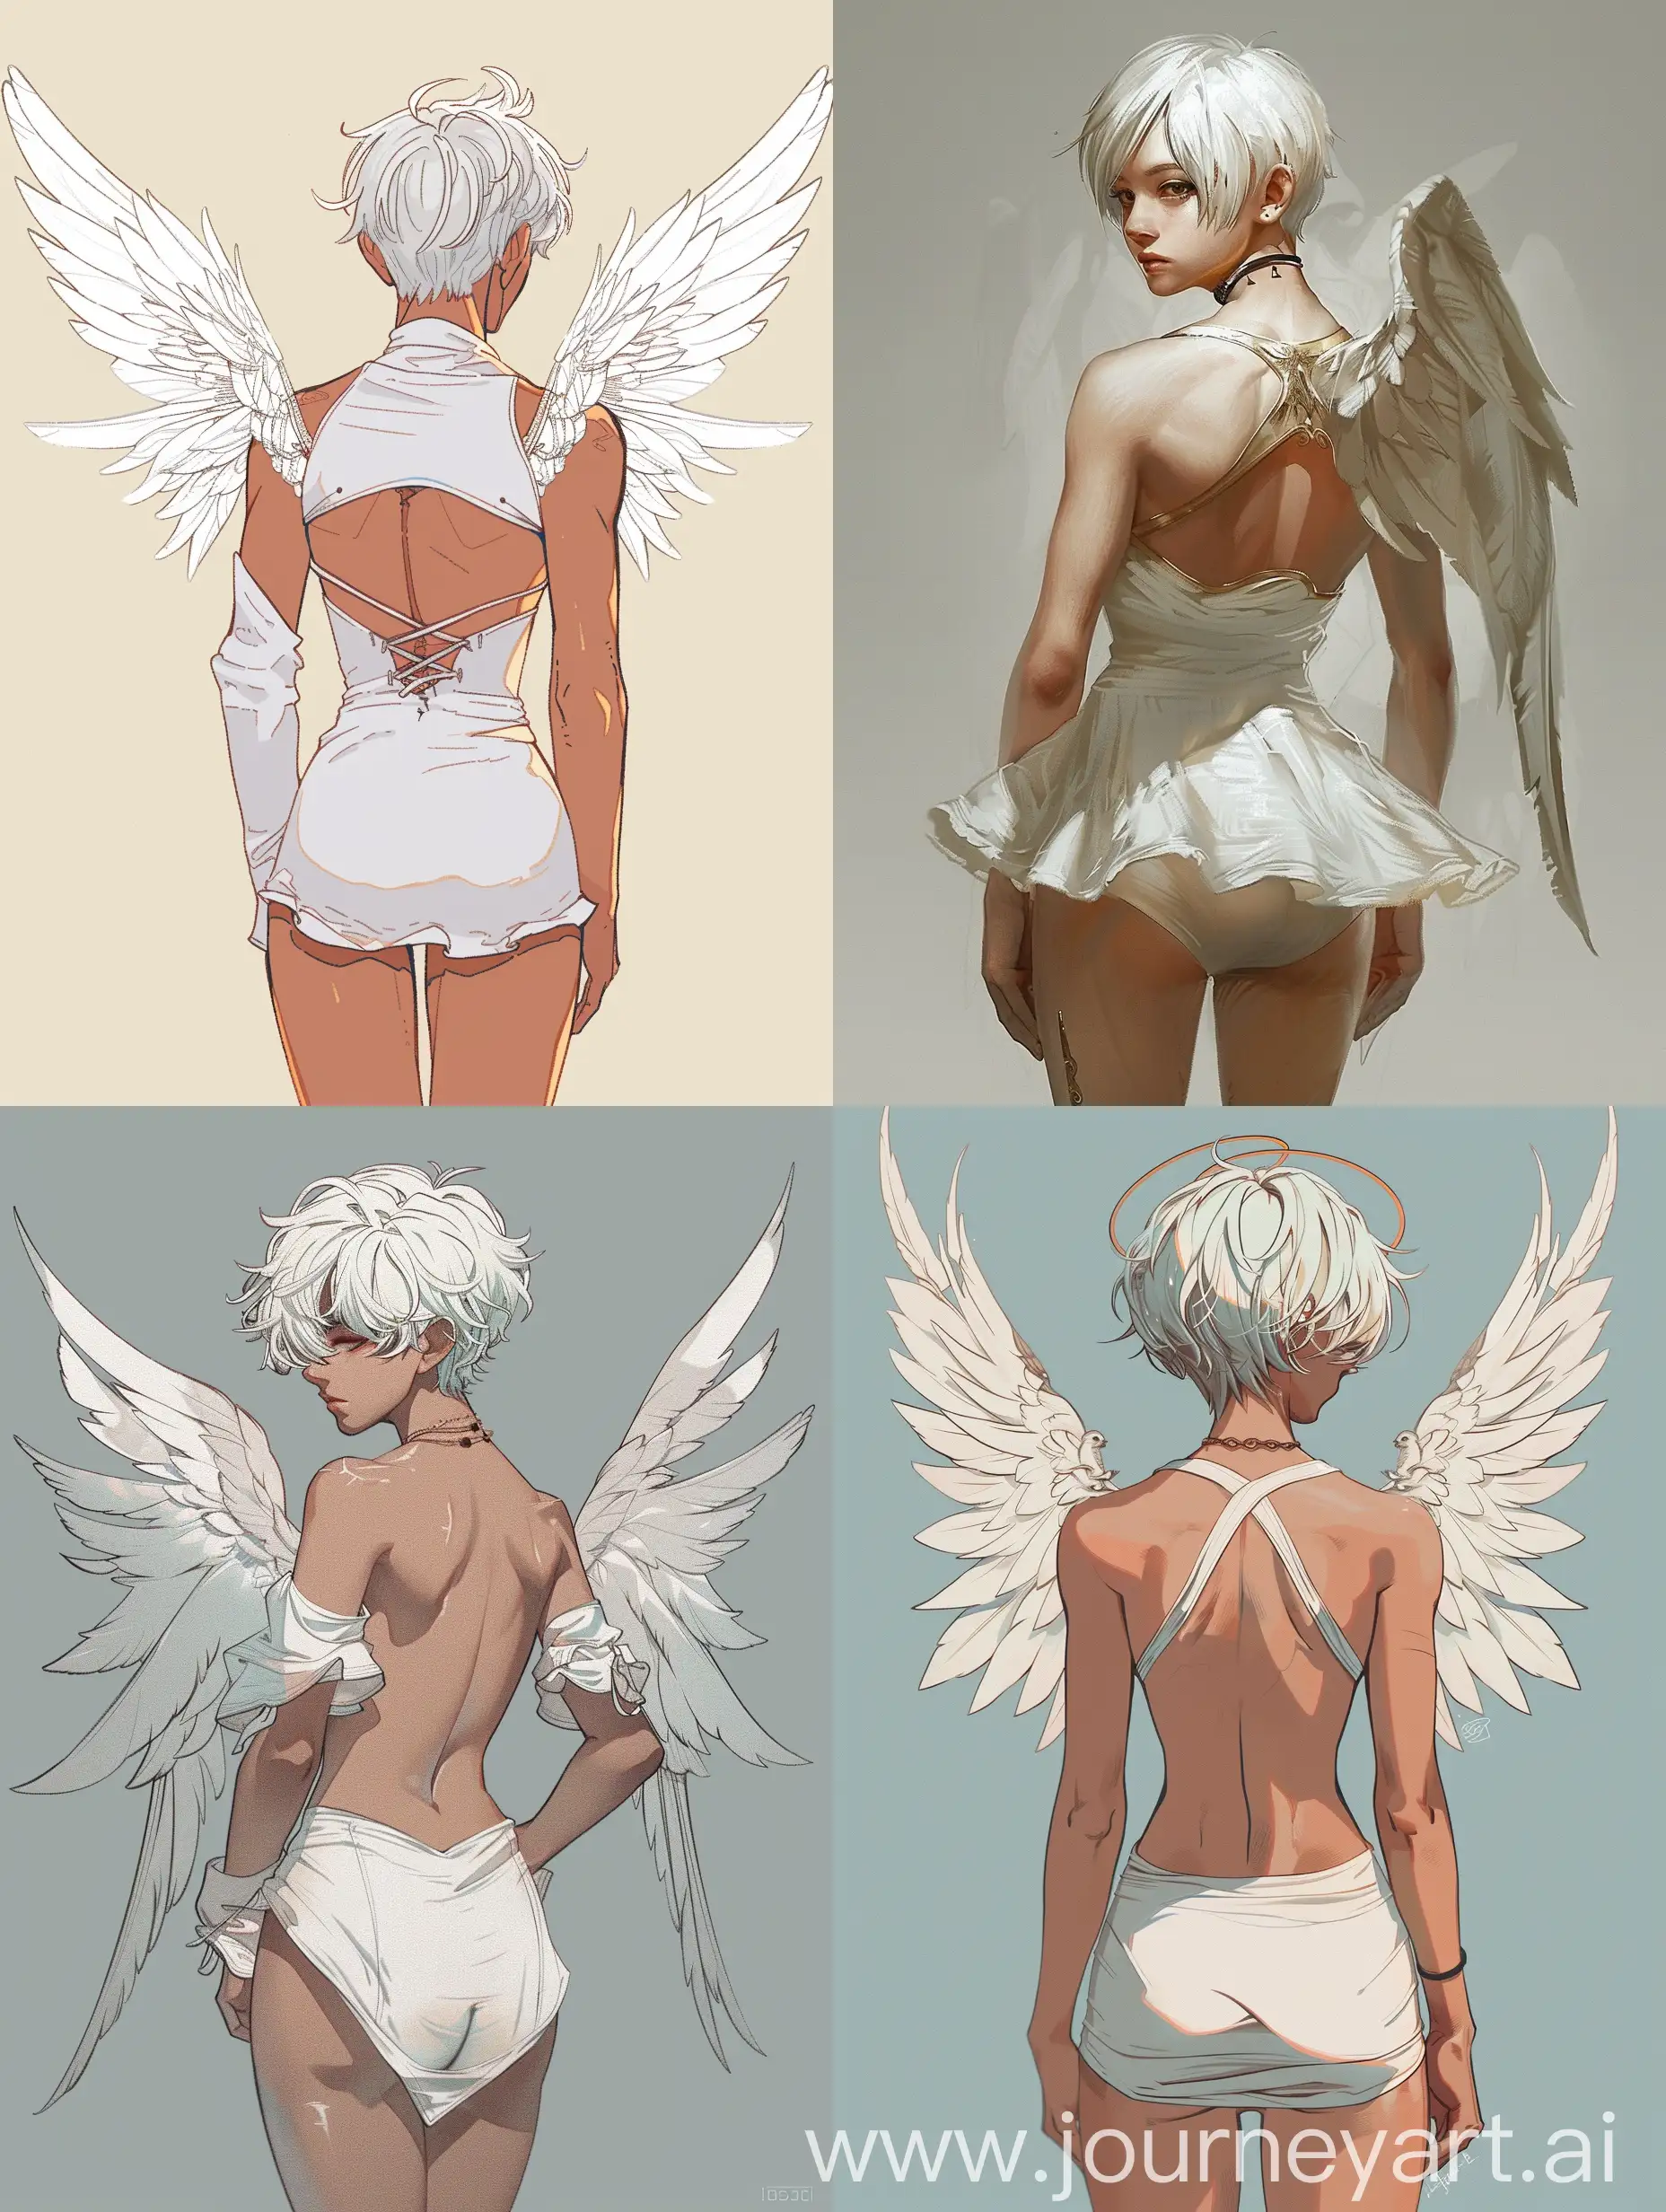 Ethereal-Angelic-Figure-with-Short-White-Hair-and-Graceful-Wings-in-Elegant-White-Dress